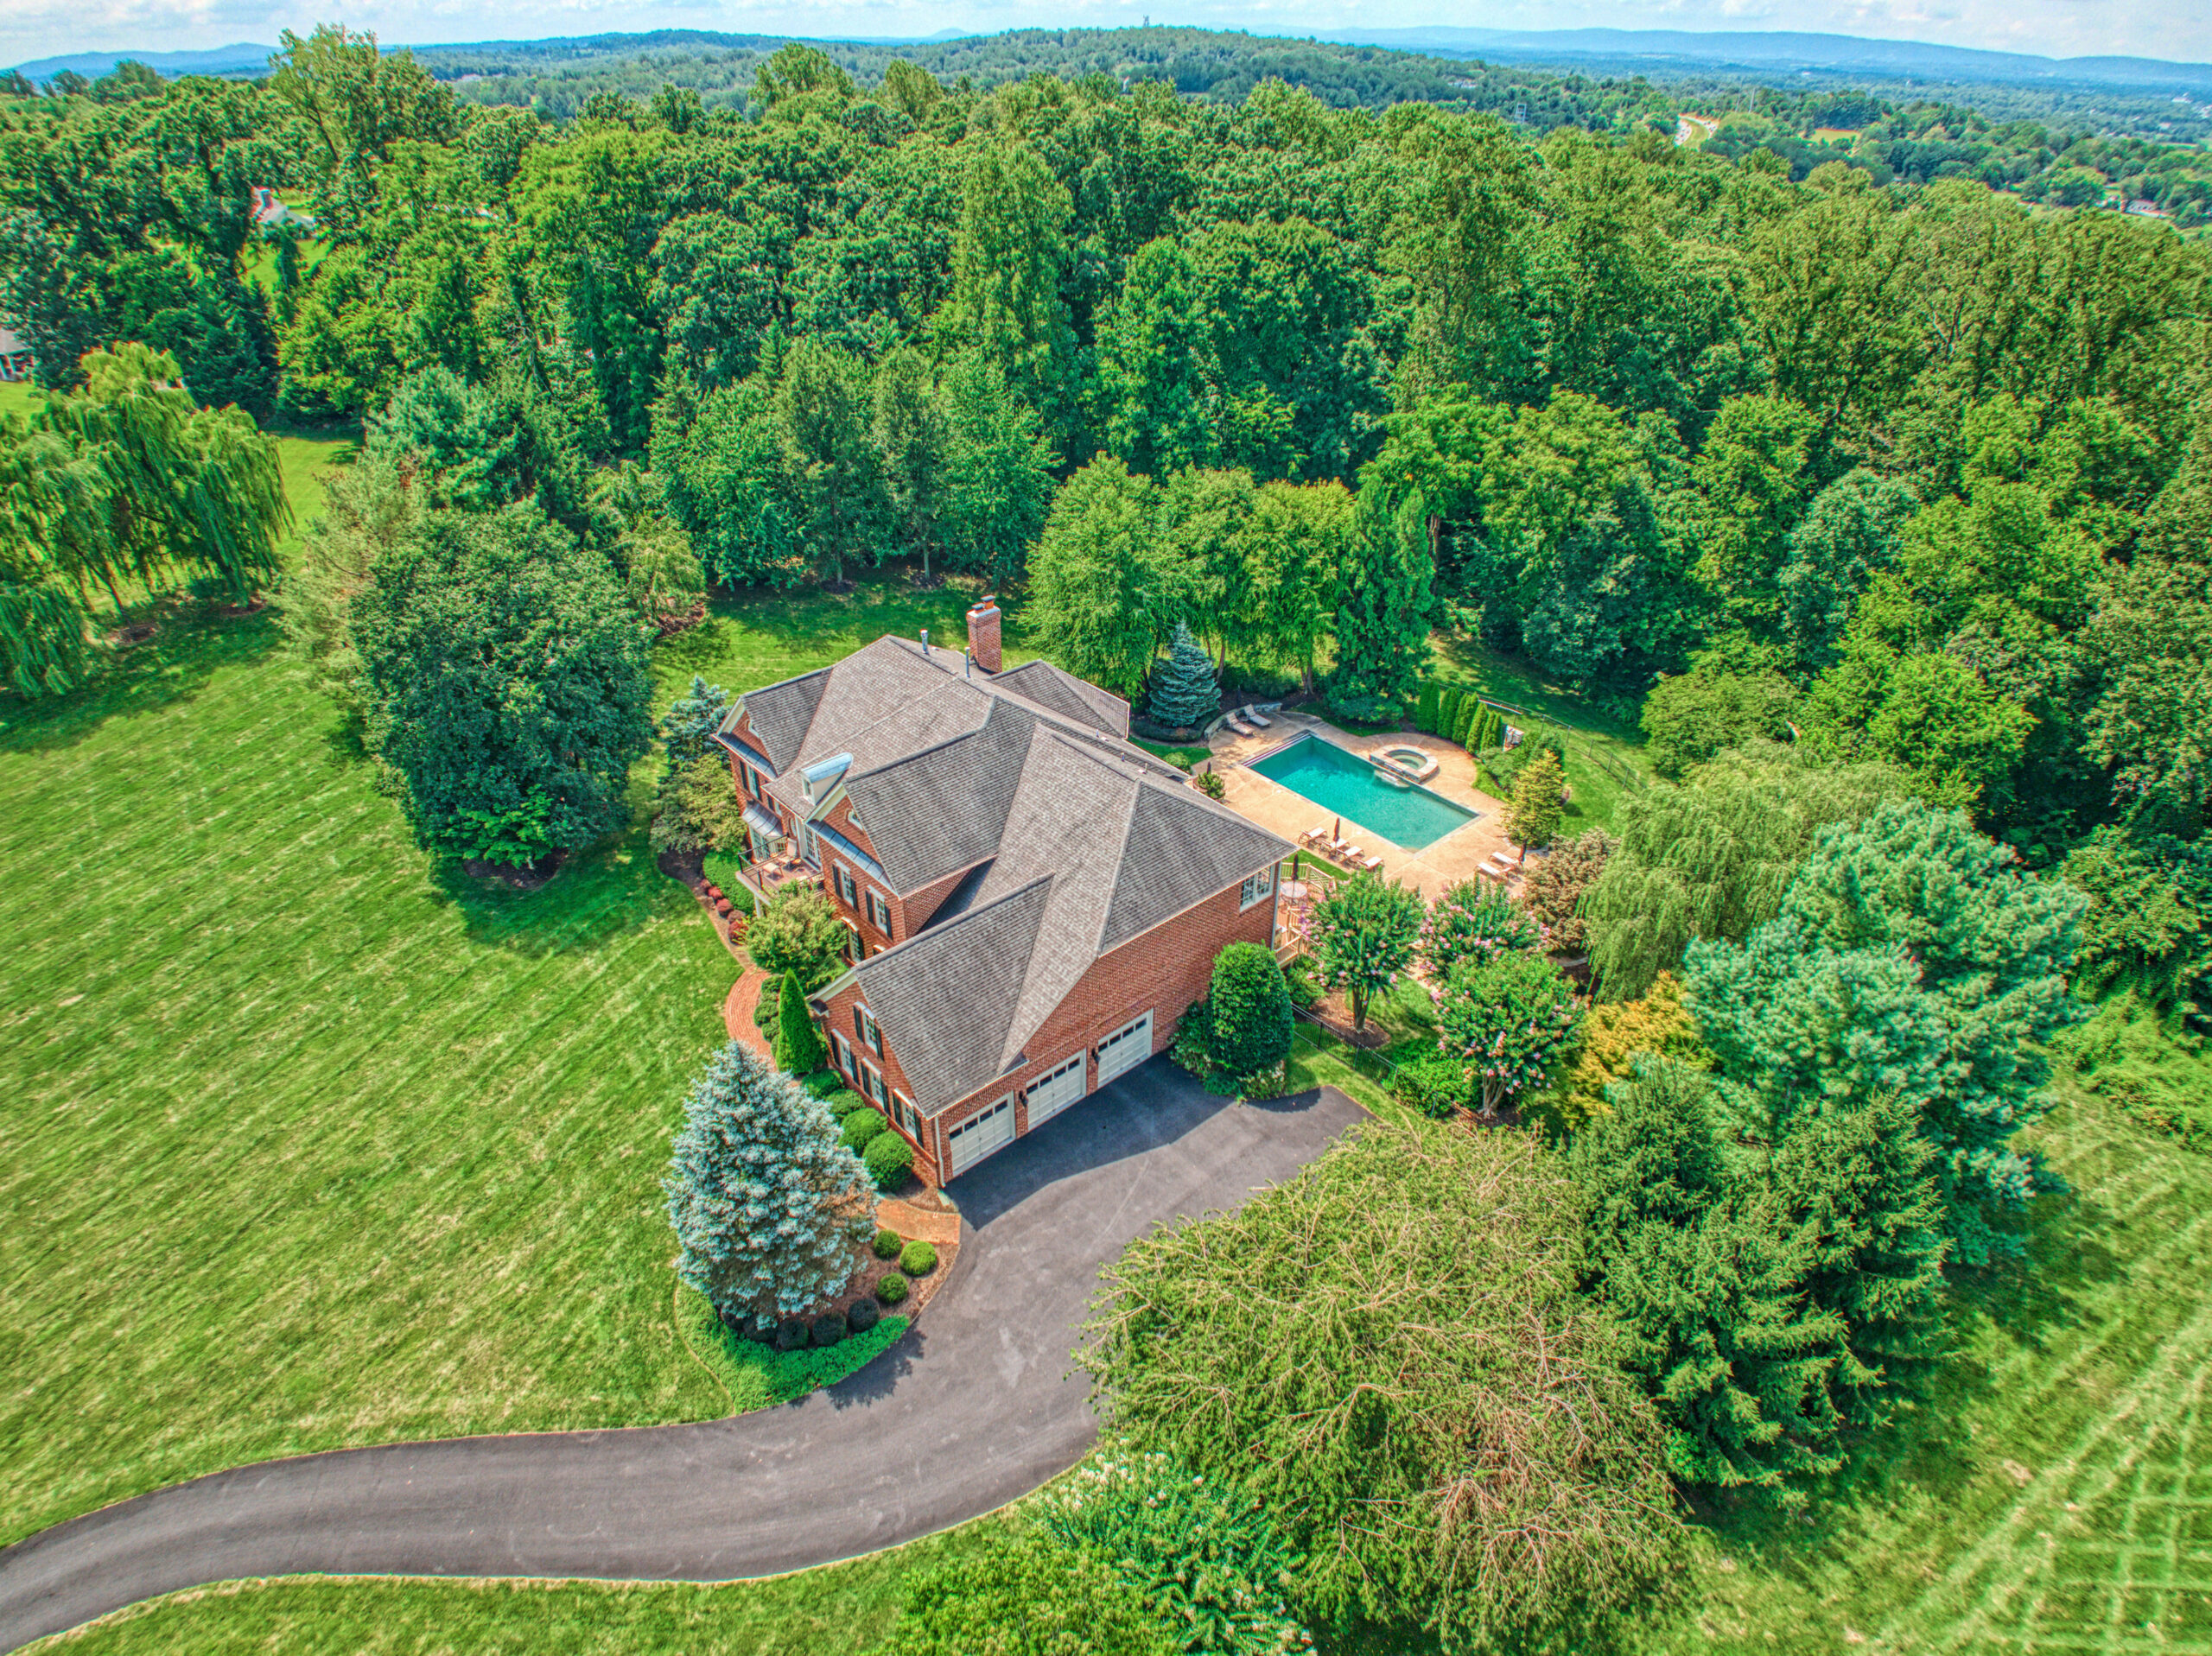 Professional exterior photo of 17087 Bold Venture Drive, Leesburg - aerial shot showing the house from the garage side with pool visible behind the home